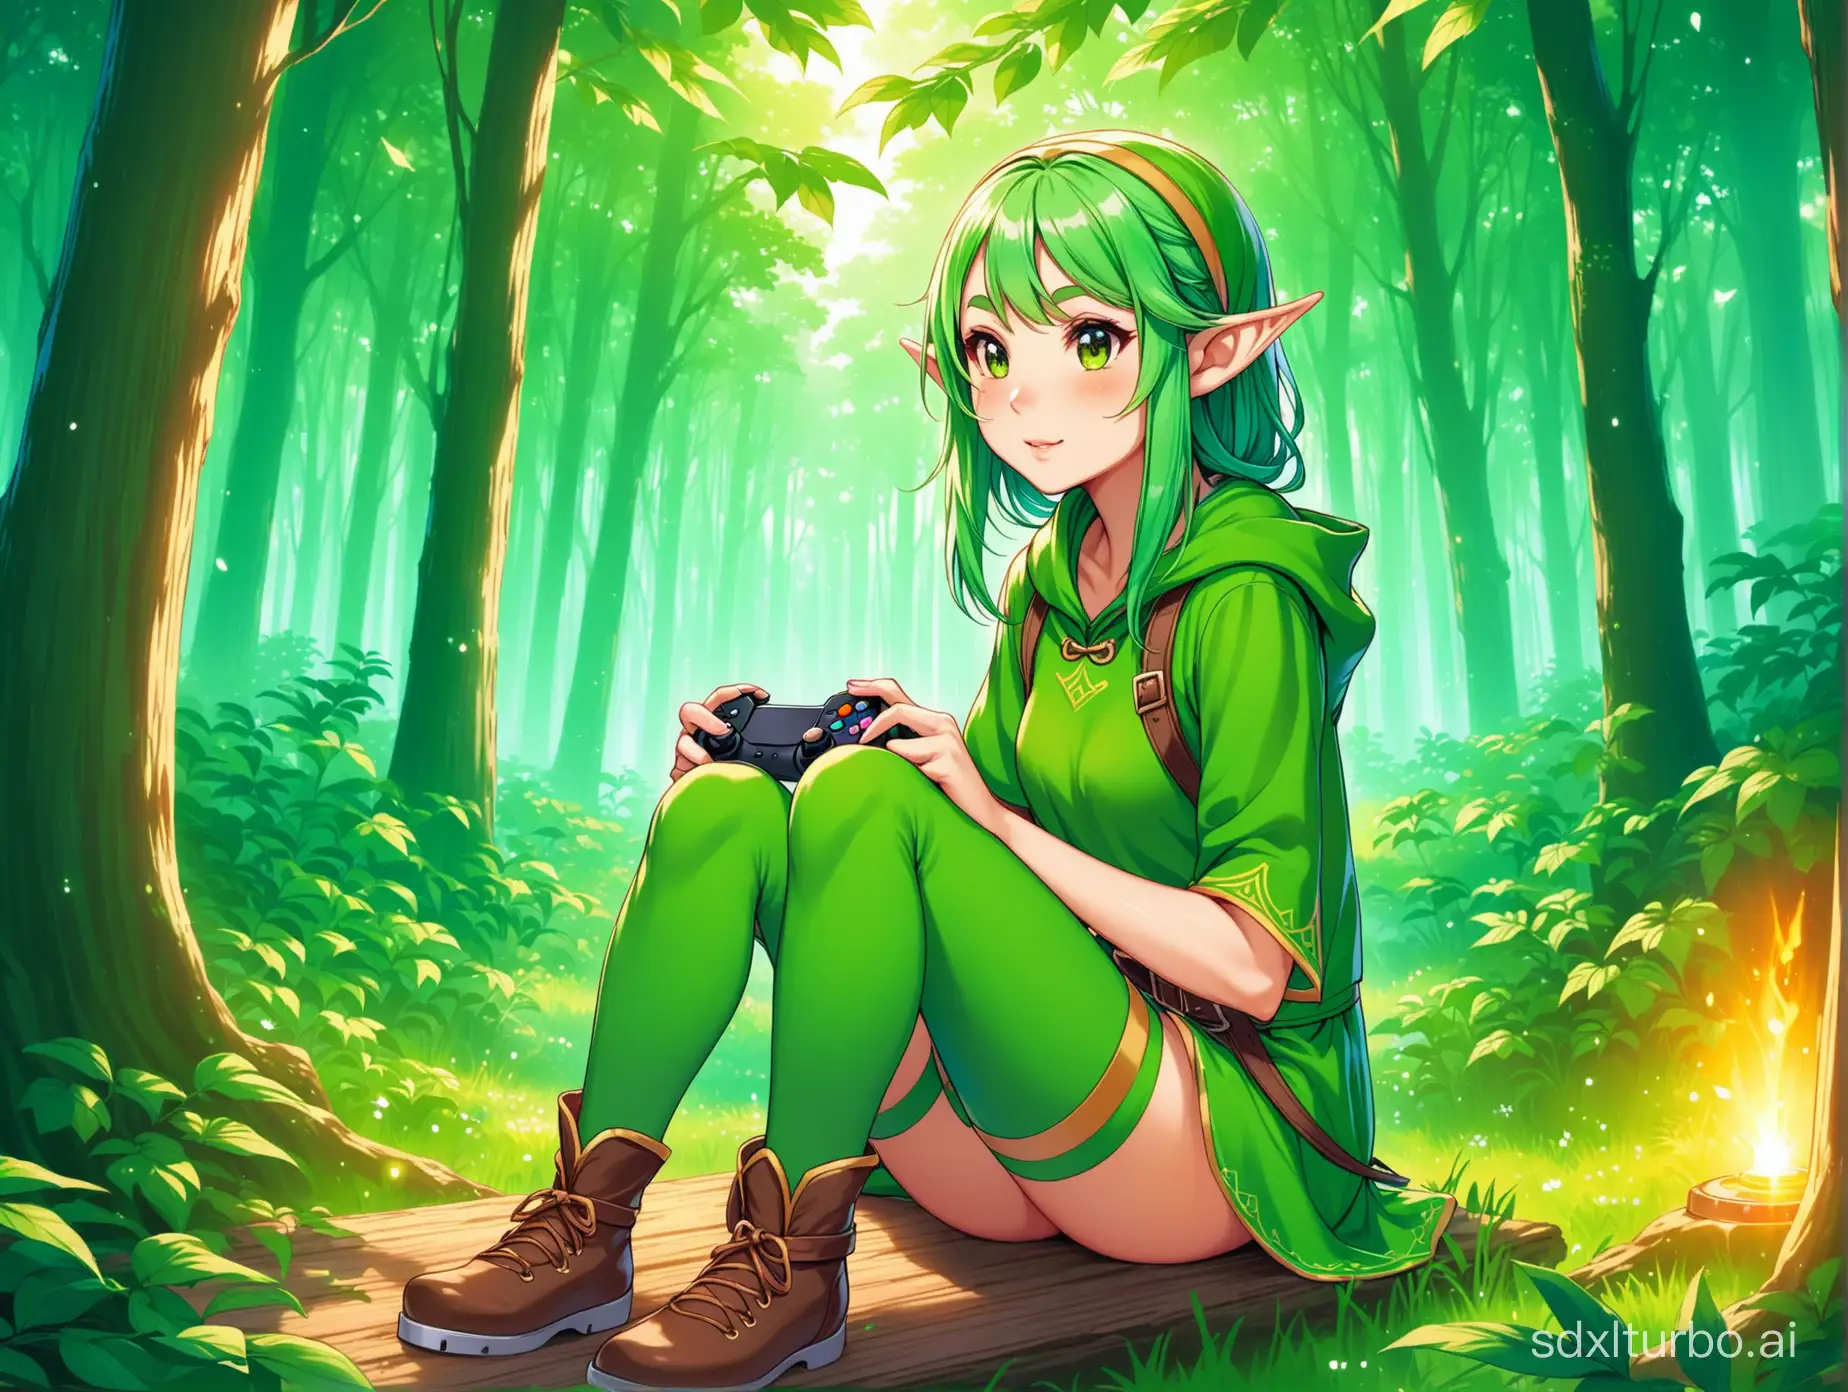 elf girl with green hair playing video game on computer sitting in forest